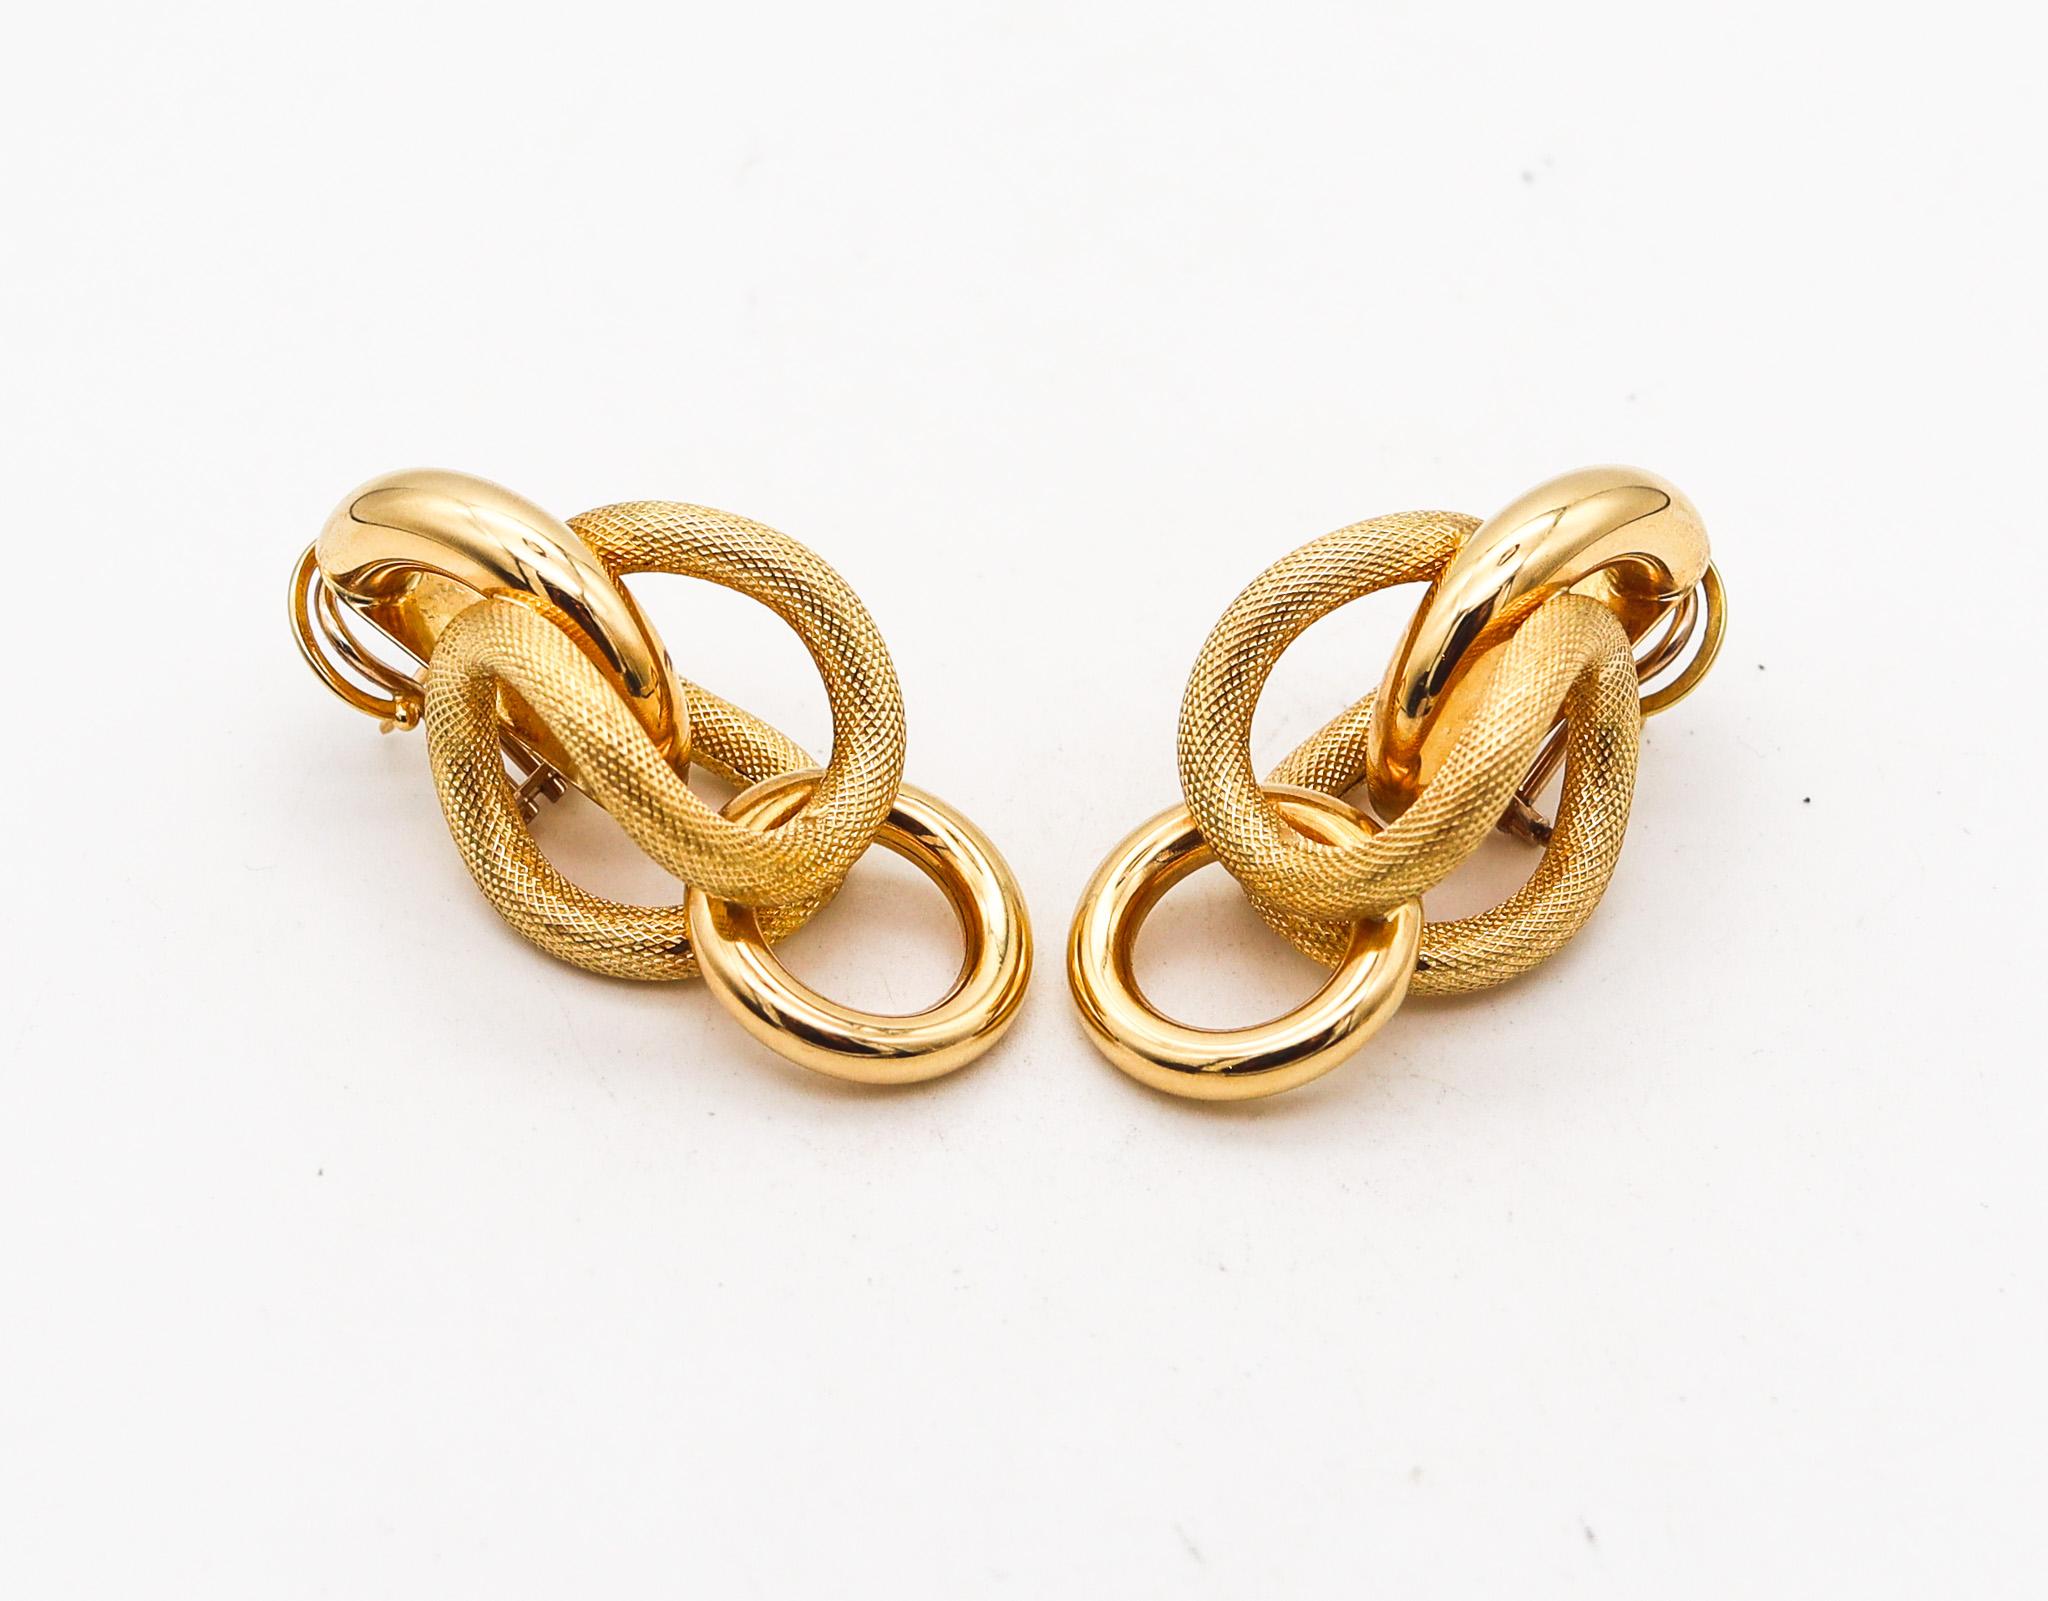 Modernist Riccardo Marotto Sculptural Tubular Earrings In Textured 18Kt Yellow Gold For Sale